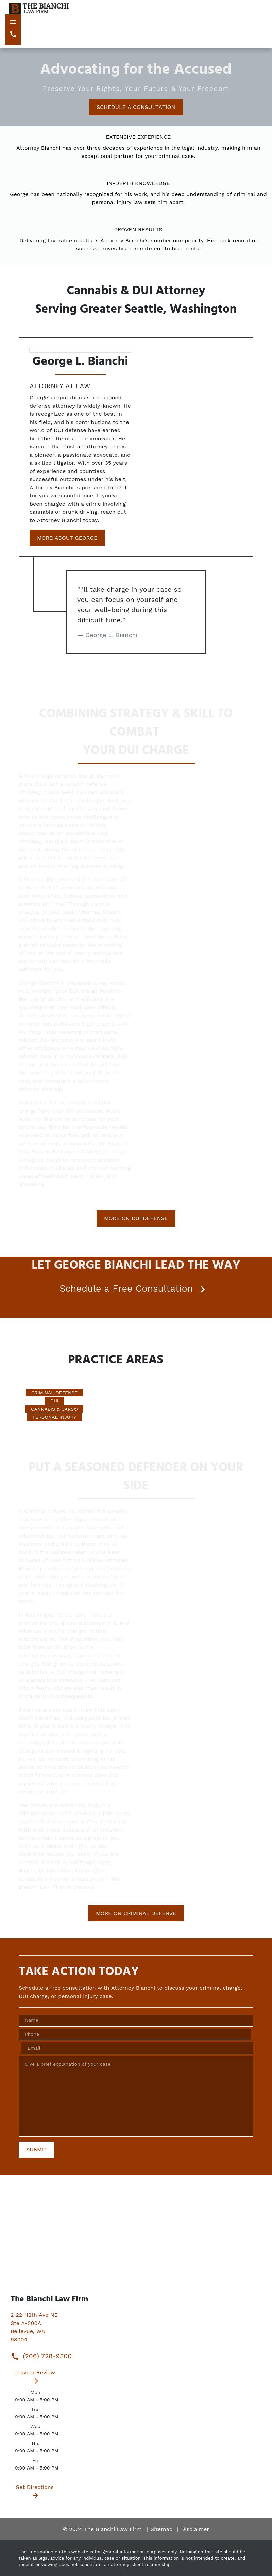 The Bianchi Law Firm - Bellevue WA Lawyers